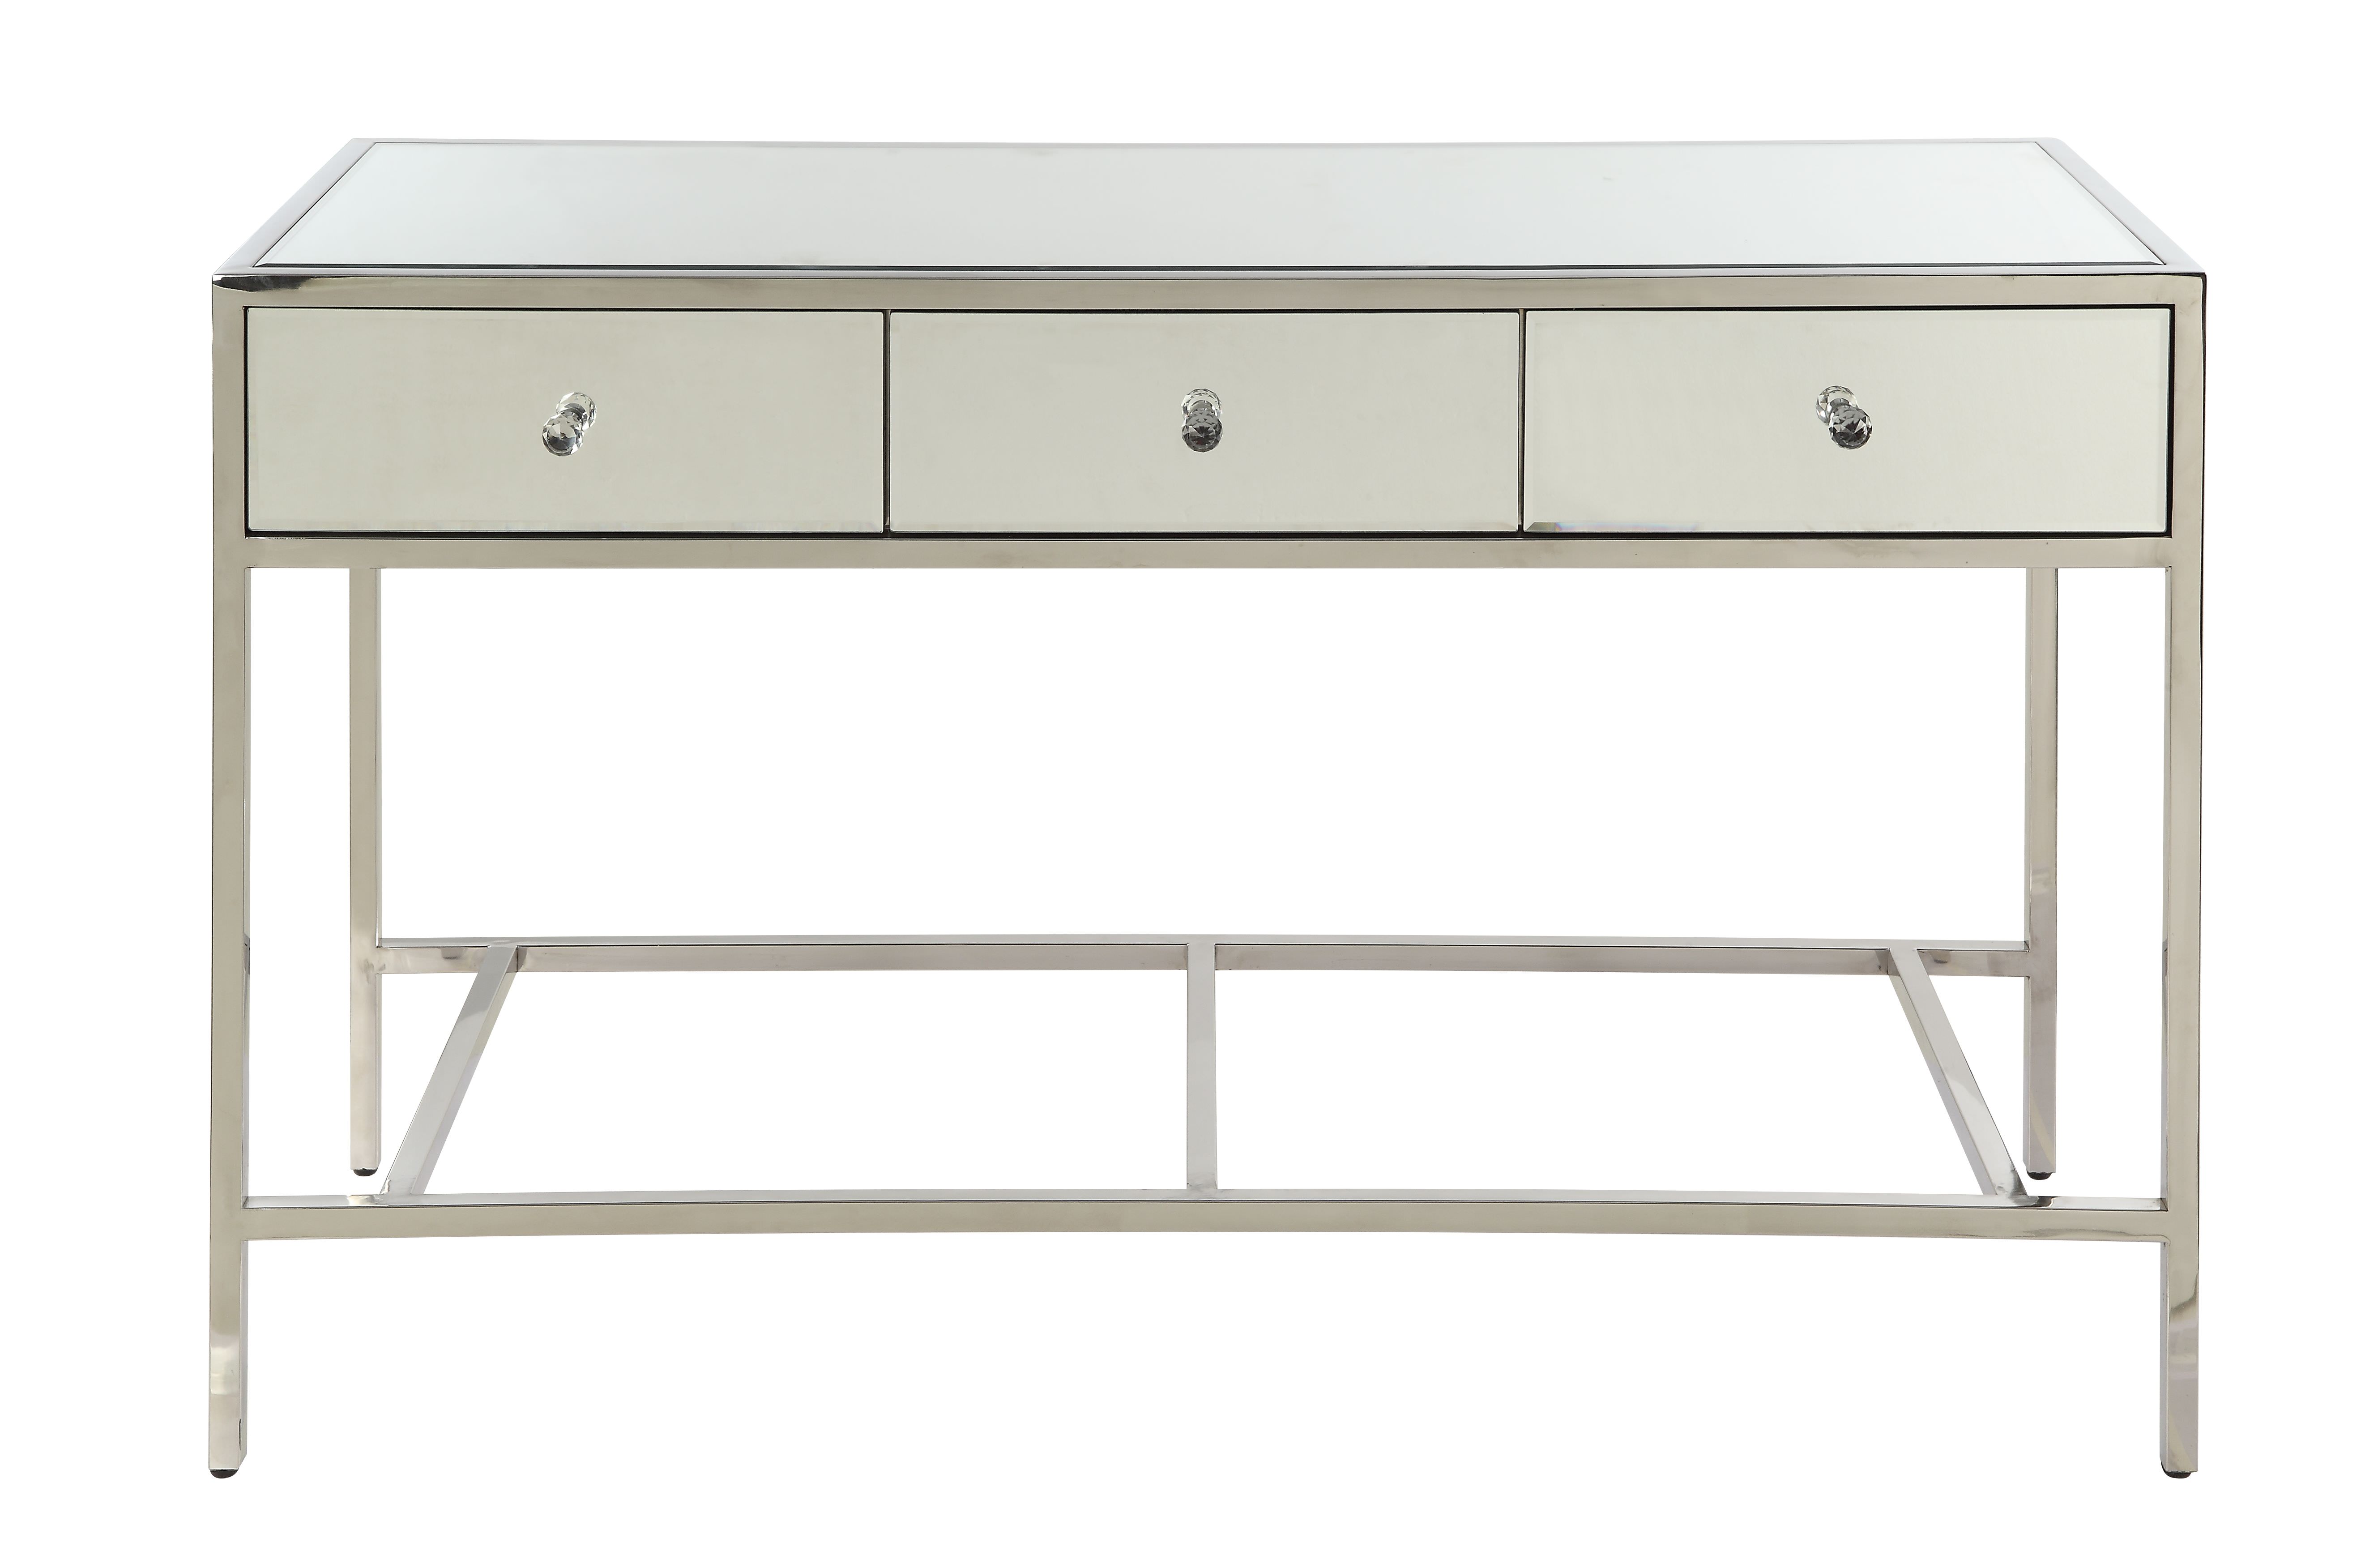 ACME Weigela Rectangular Sofa Table in Mirrored and Chrome - image 3 of 7